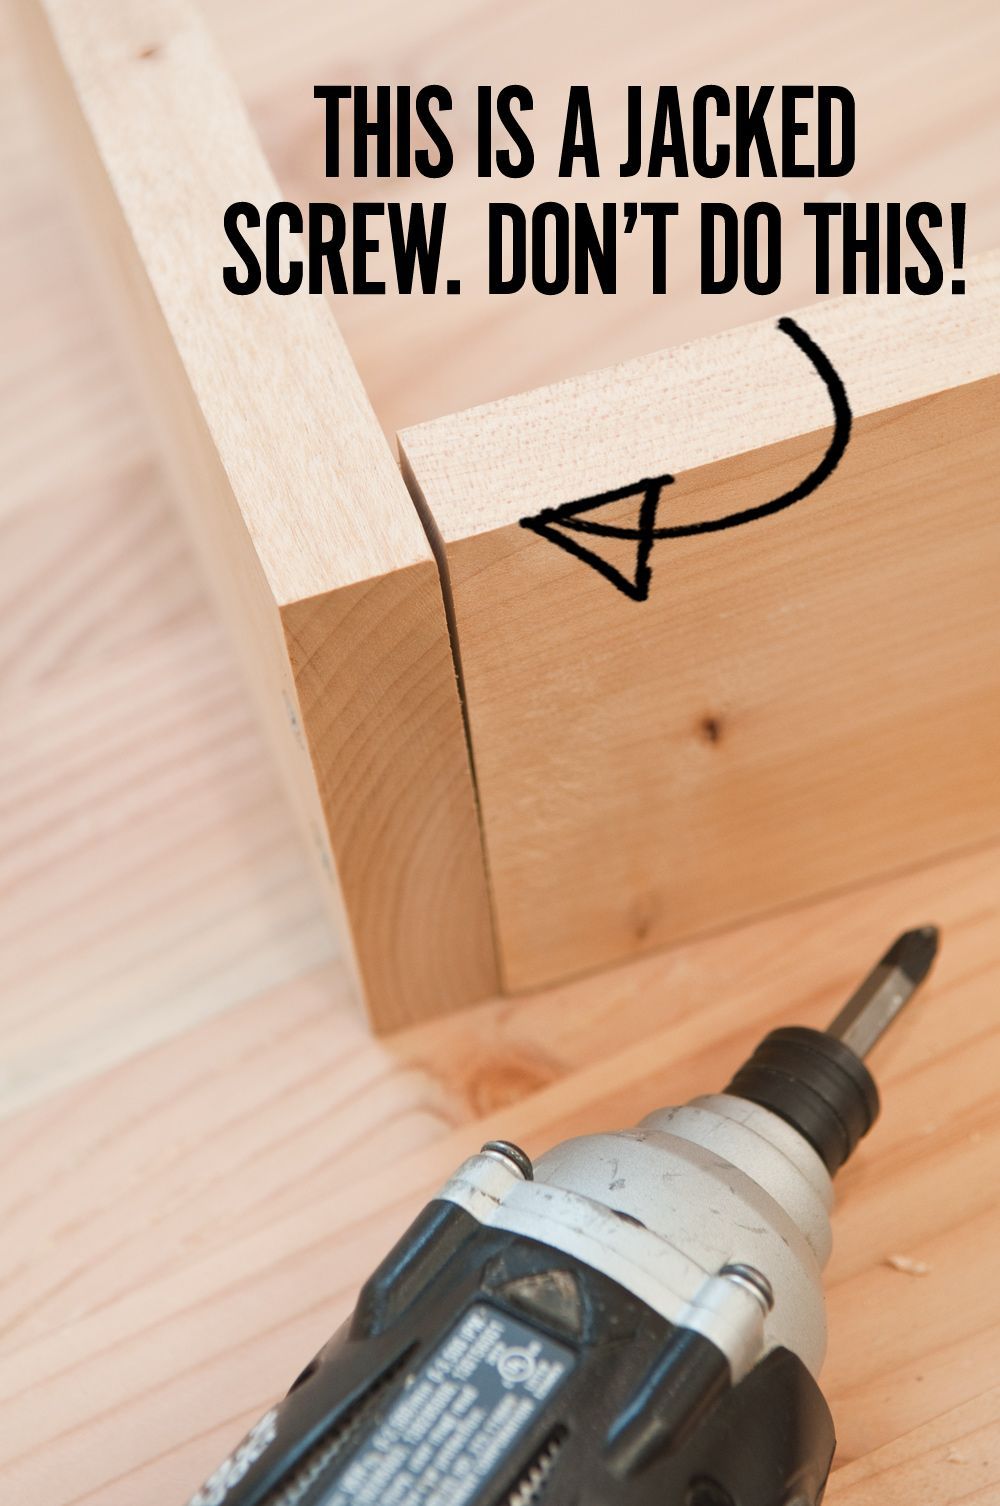 18 diy projects for men ideas